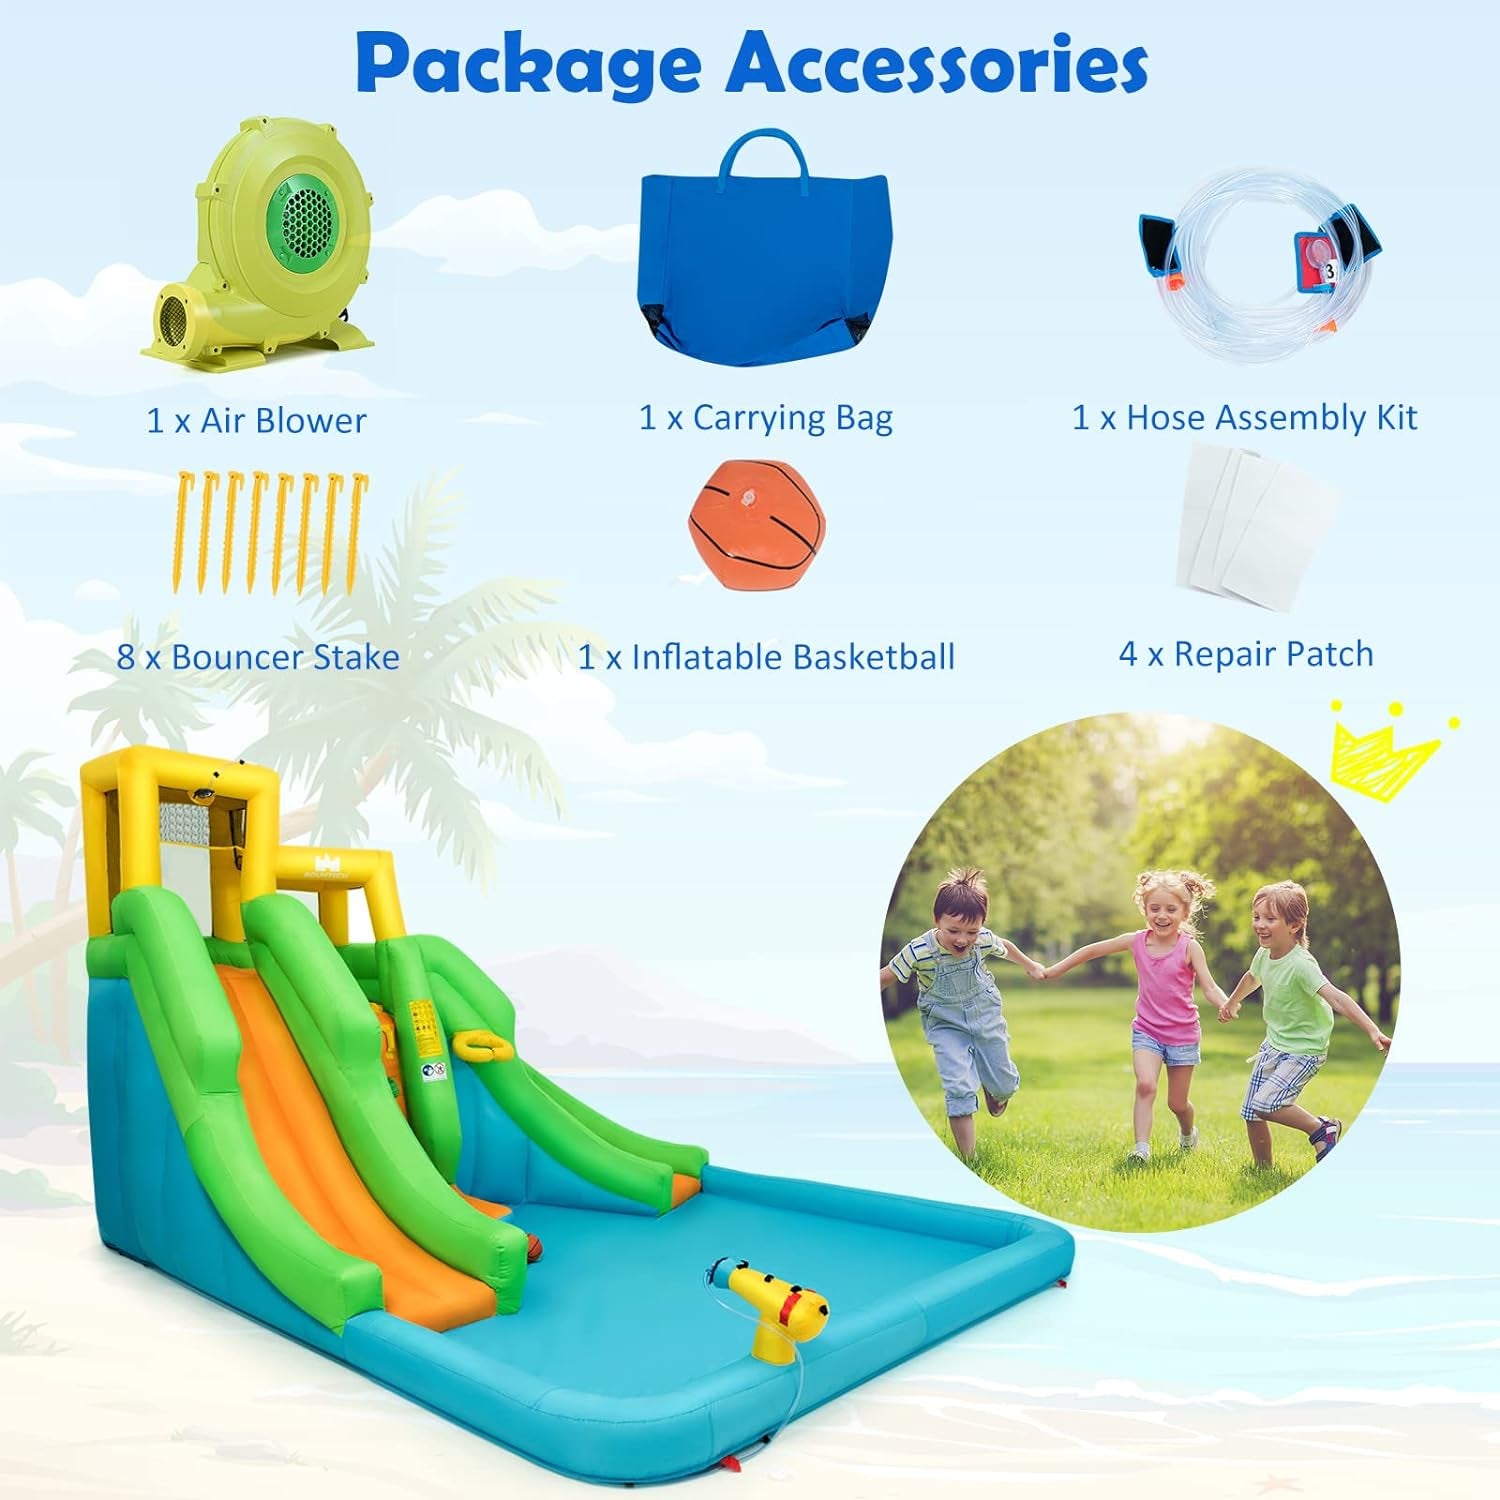 Inflatable Water Slide, 6 in 1 Kids Bouncer Water Park W/Climbing Wall & 2 Long Slides, Splash Pool, Water Cannons, Indoor Outdoor Blow up Water Slides for Backyard(With 480W Blower)